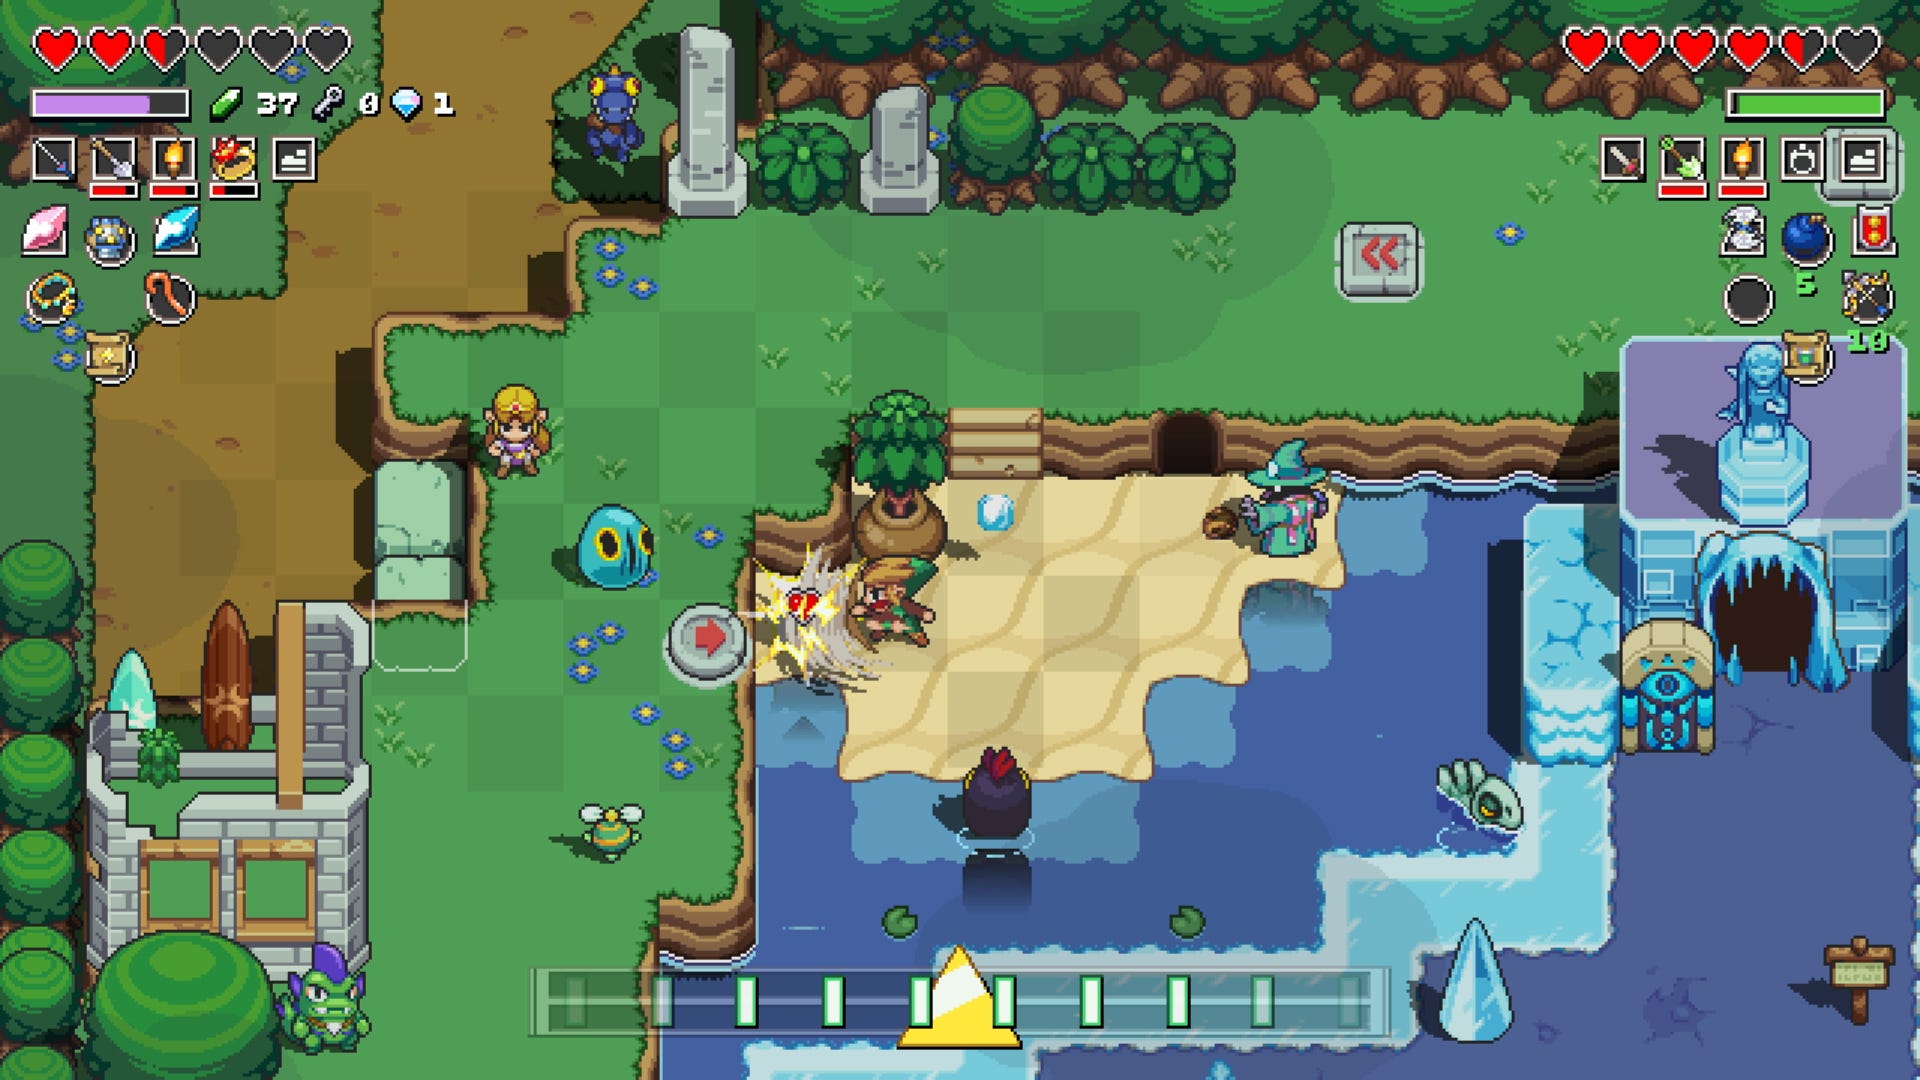 download free cadence of hyrule nintendo switch